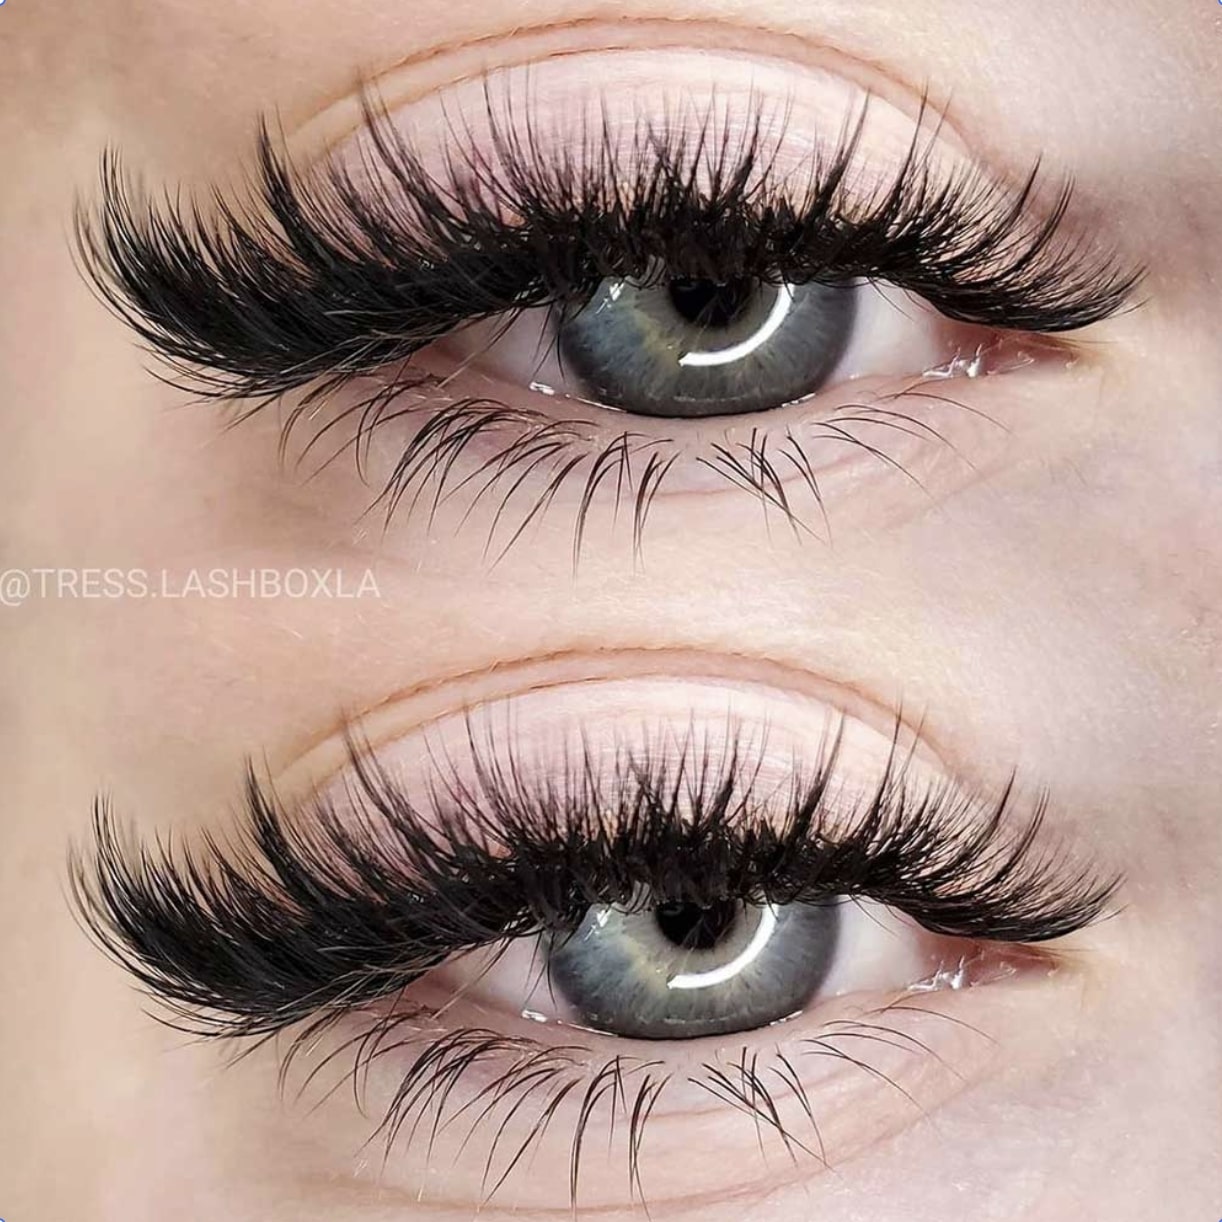 transform-your-look-with-5-individual-eyelash-extensions-trends-7